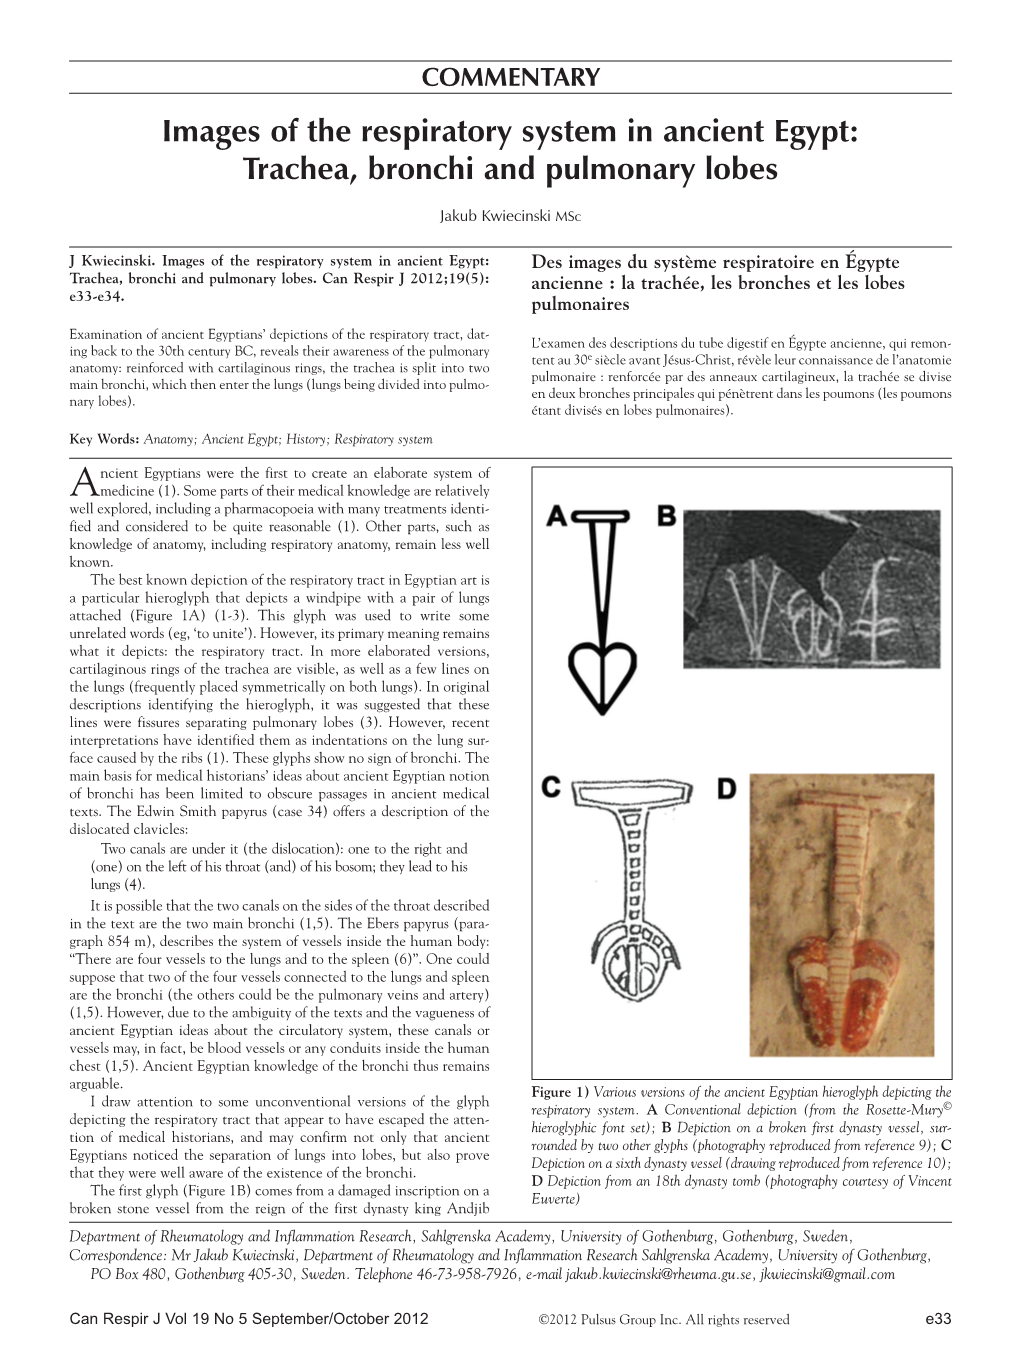 Images of the Respiratory System in Ancient Egypt: Trachea, Bronchi and Pulmonary Lobes